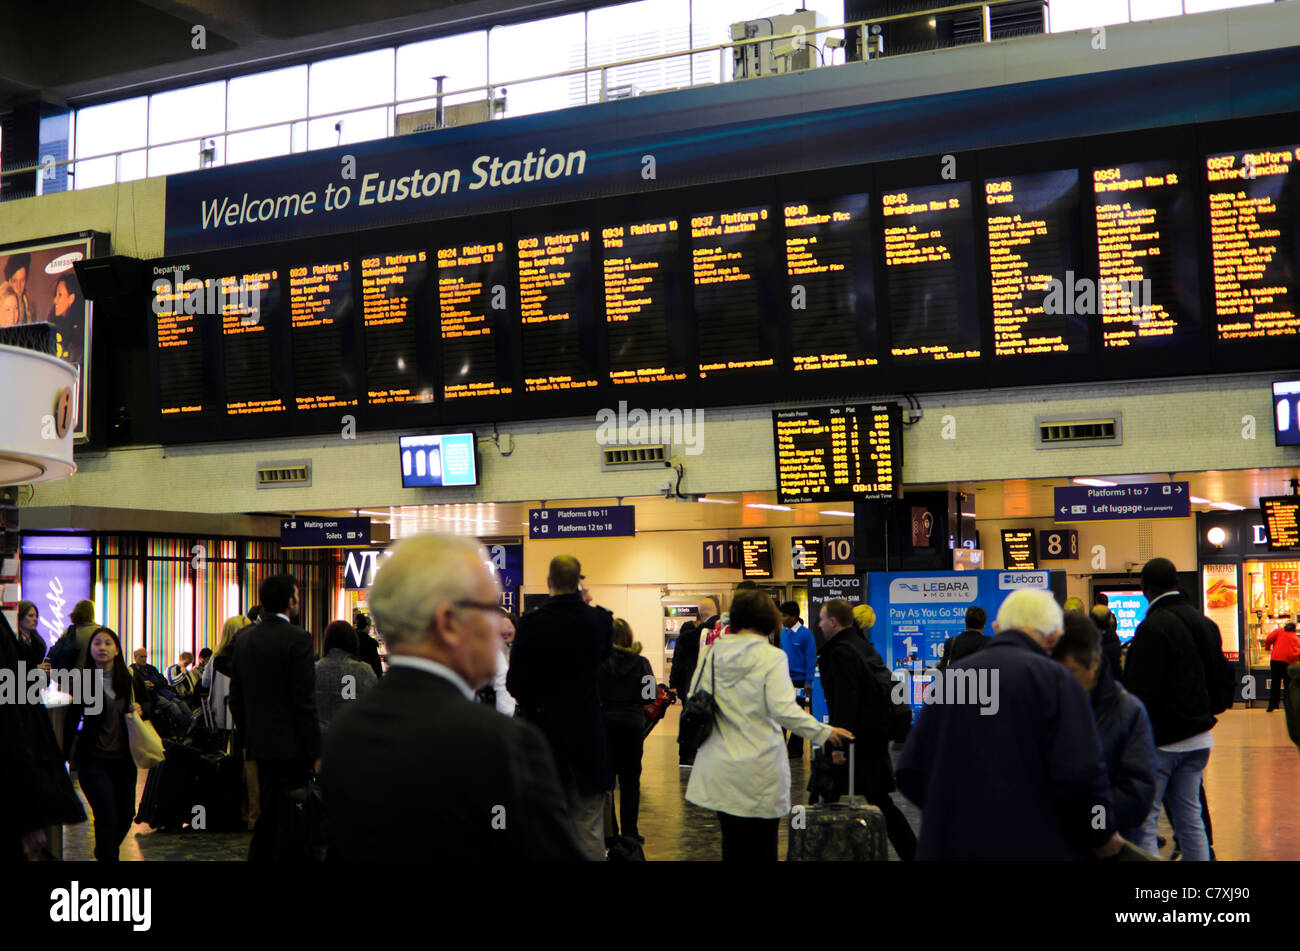 Passengers check departure times in the concourse of Euston Station, London, England. Stock Photo